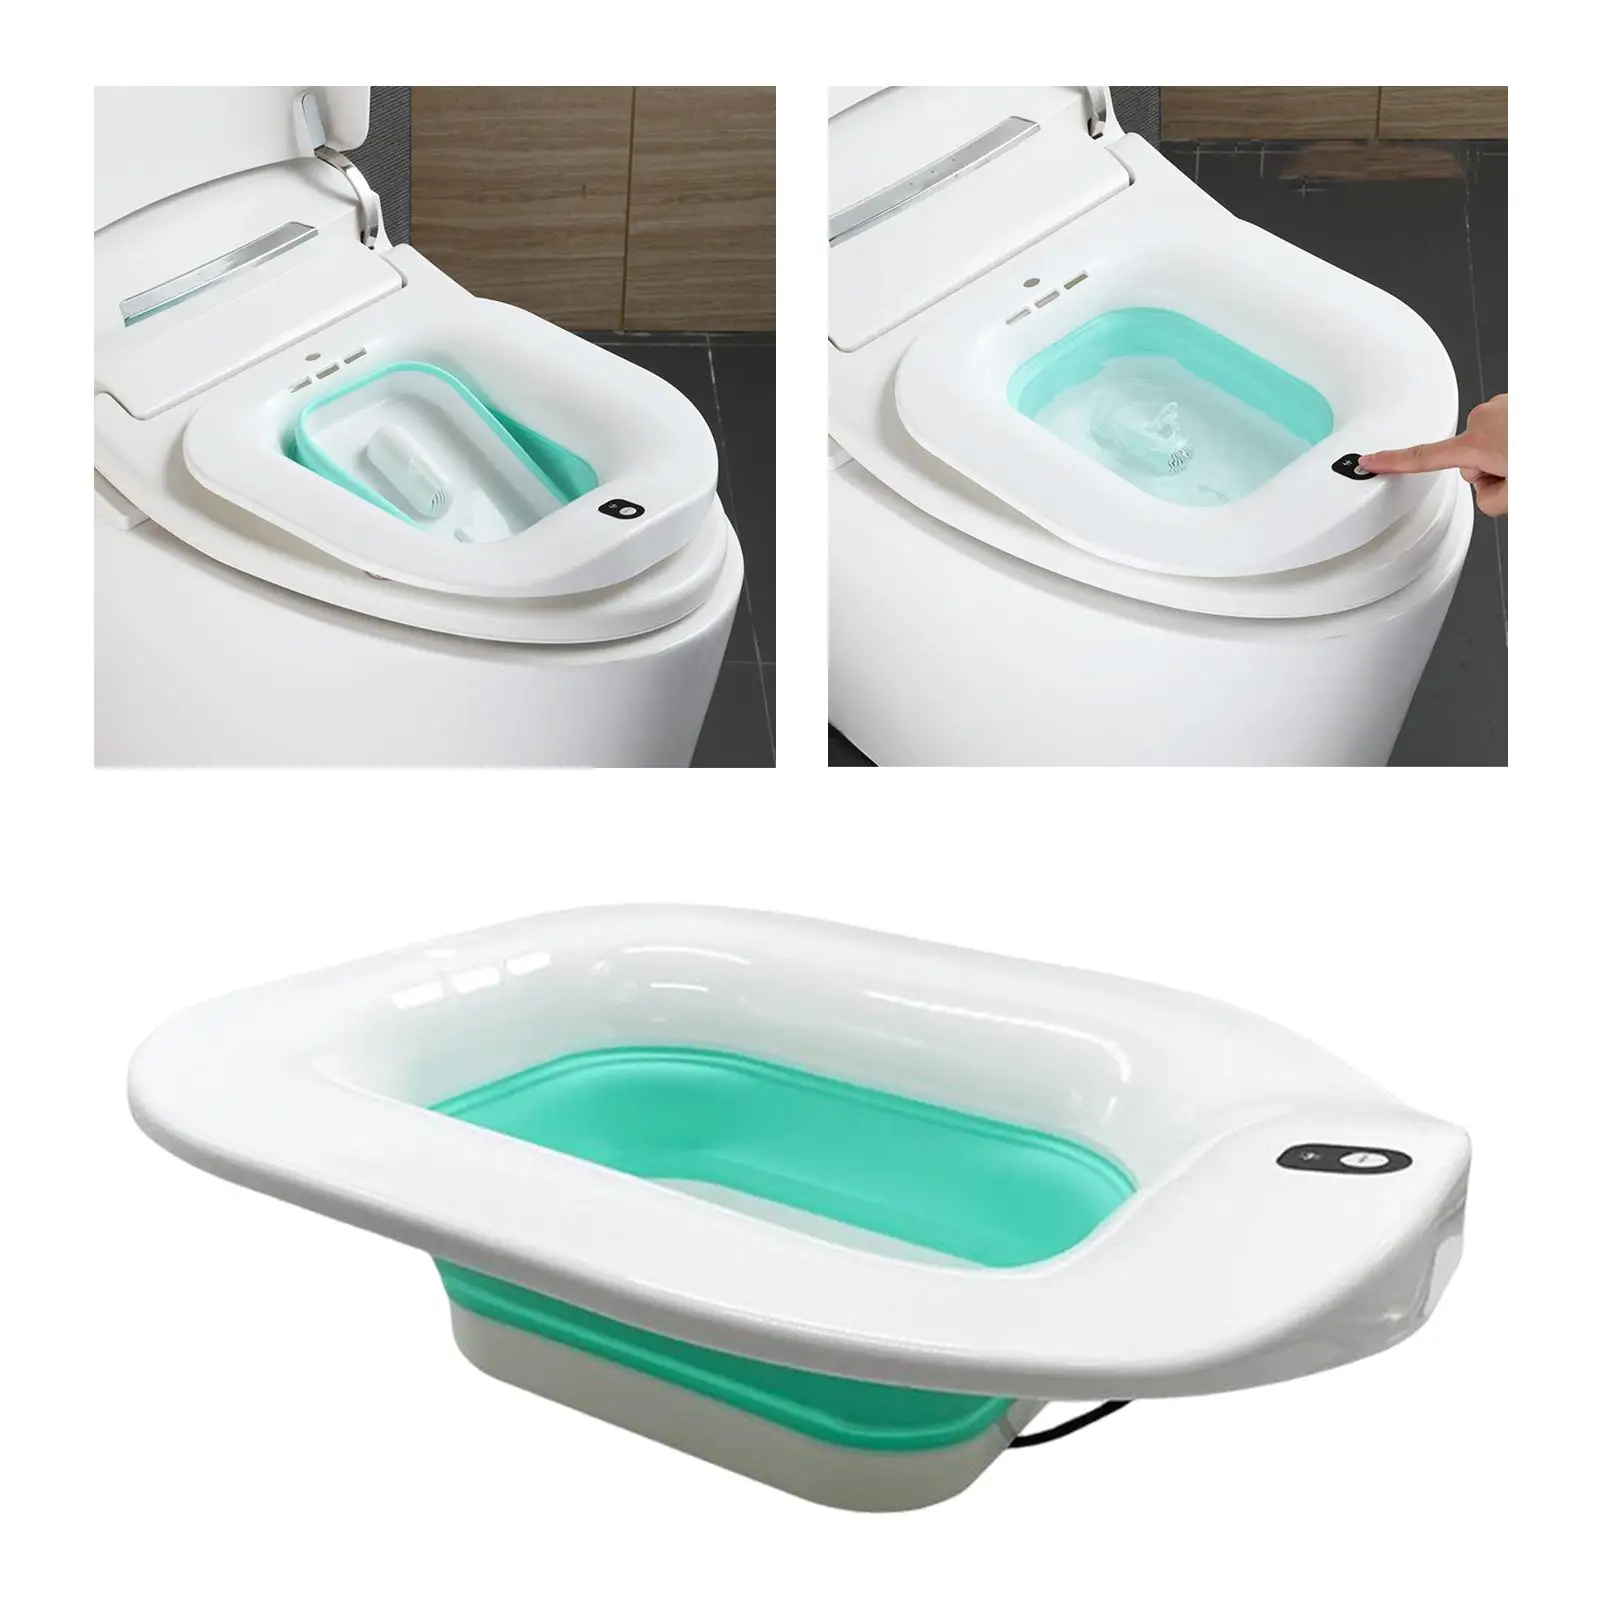 Electric Sitz Bath for Toilet Bidet Cleansing Bidet Water Spray Steam Seat for Cleaning Postpartum Soothes for Standard Toilets